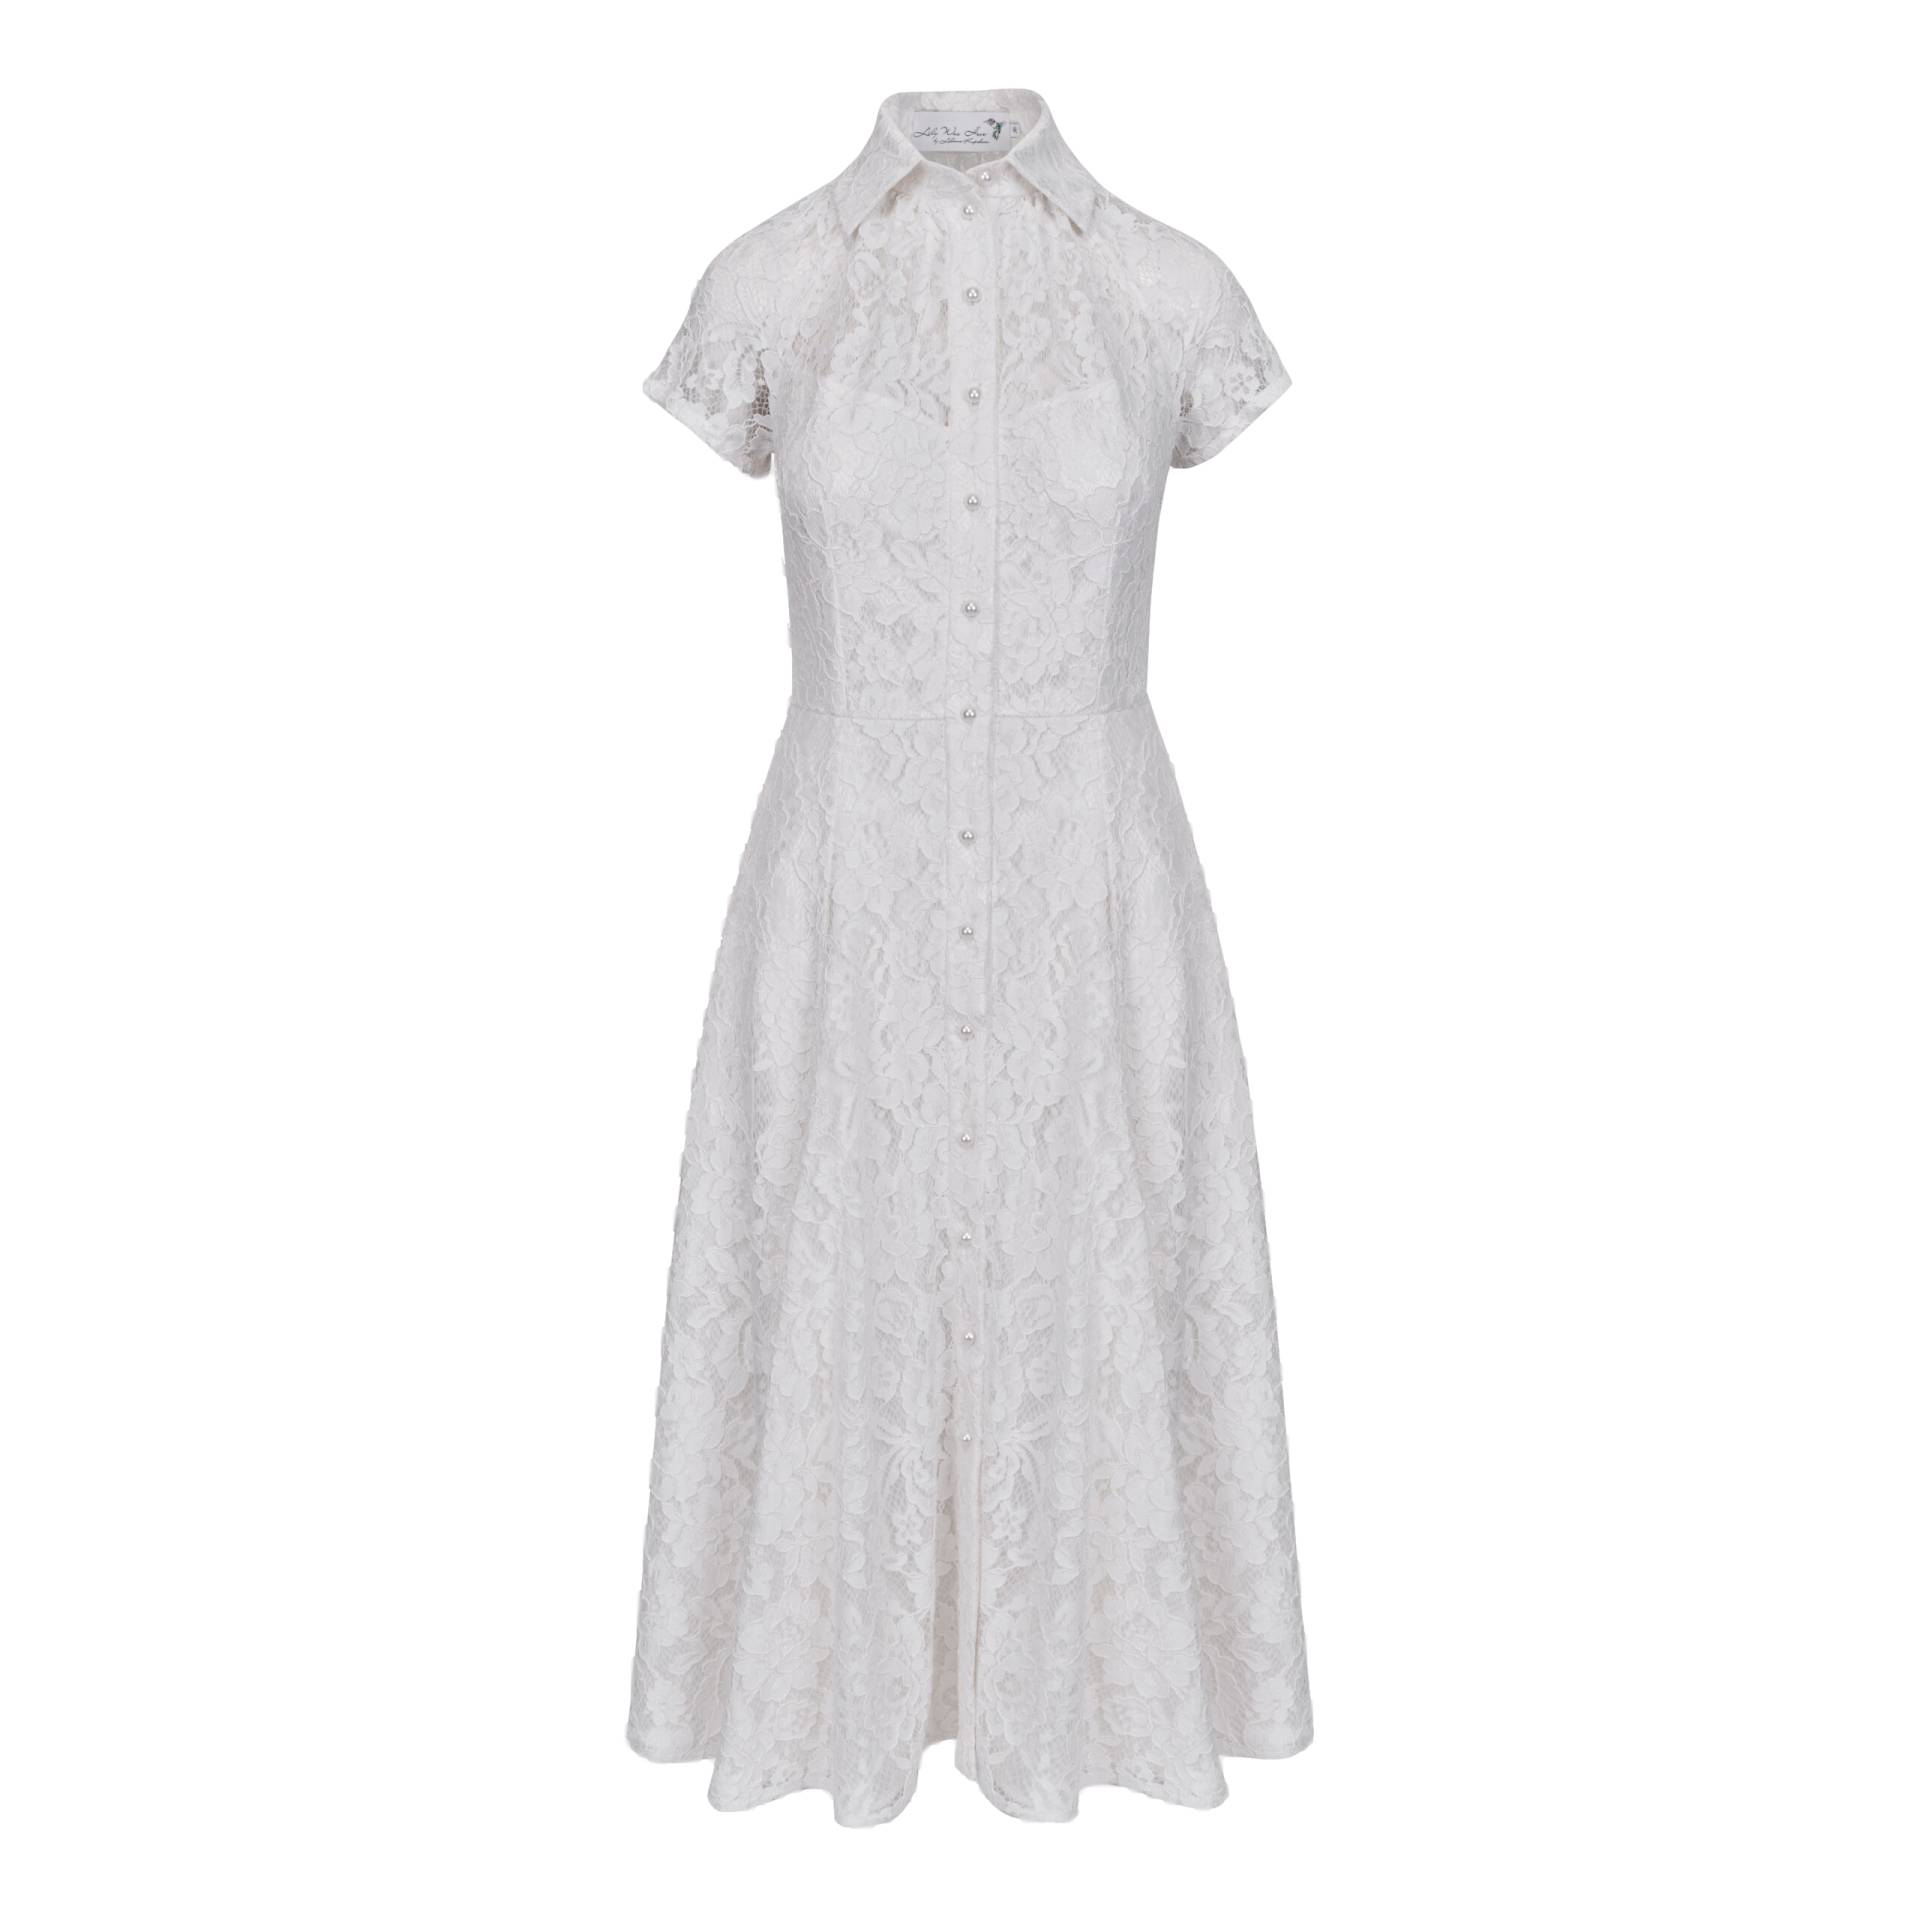 Full of elegance dress made of ecru lace fastened with pearl buttons von Lily Was Here